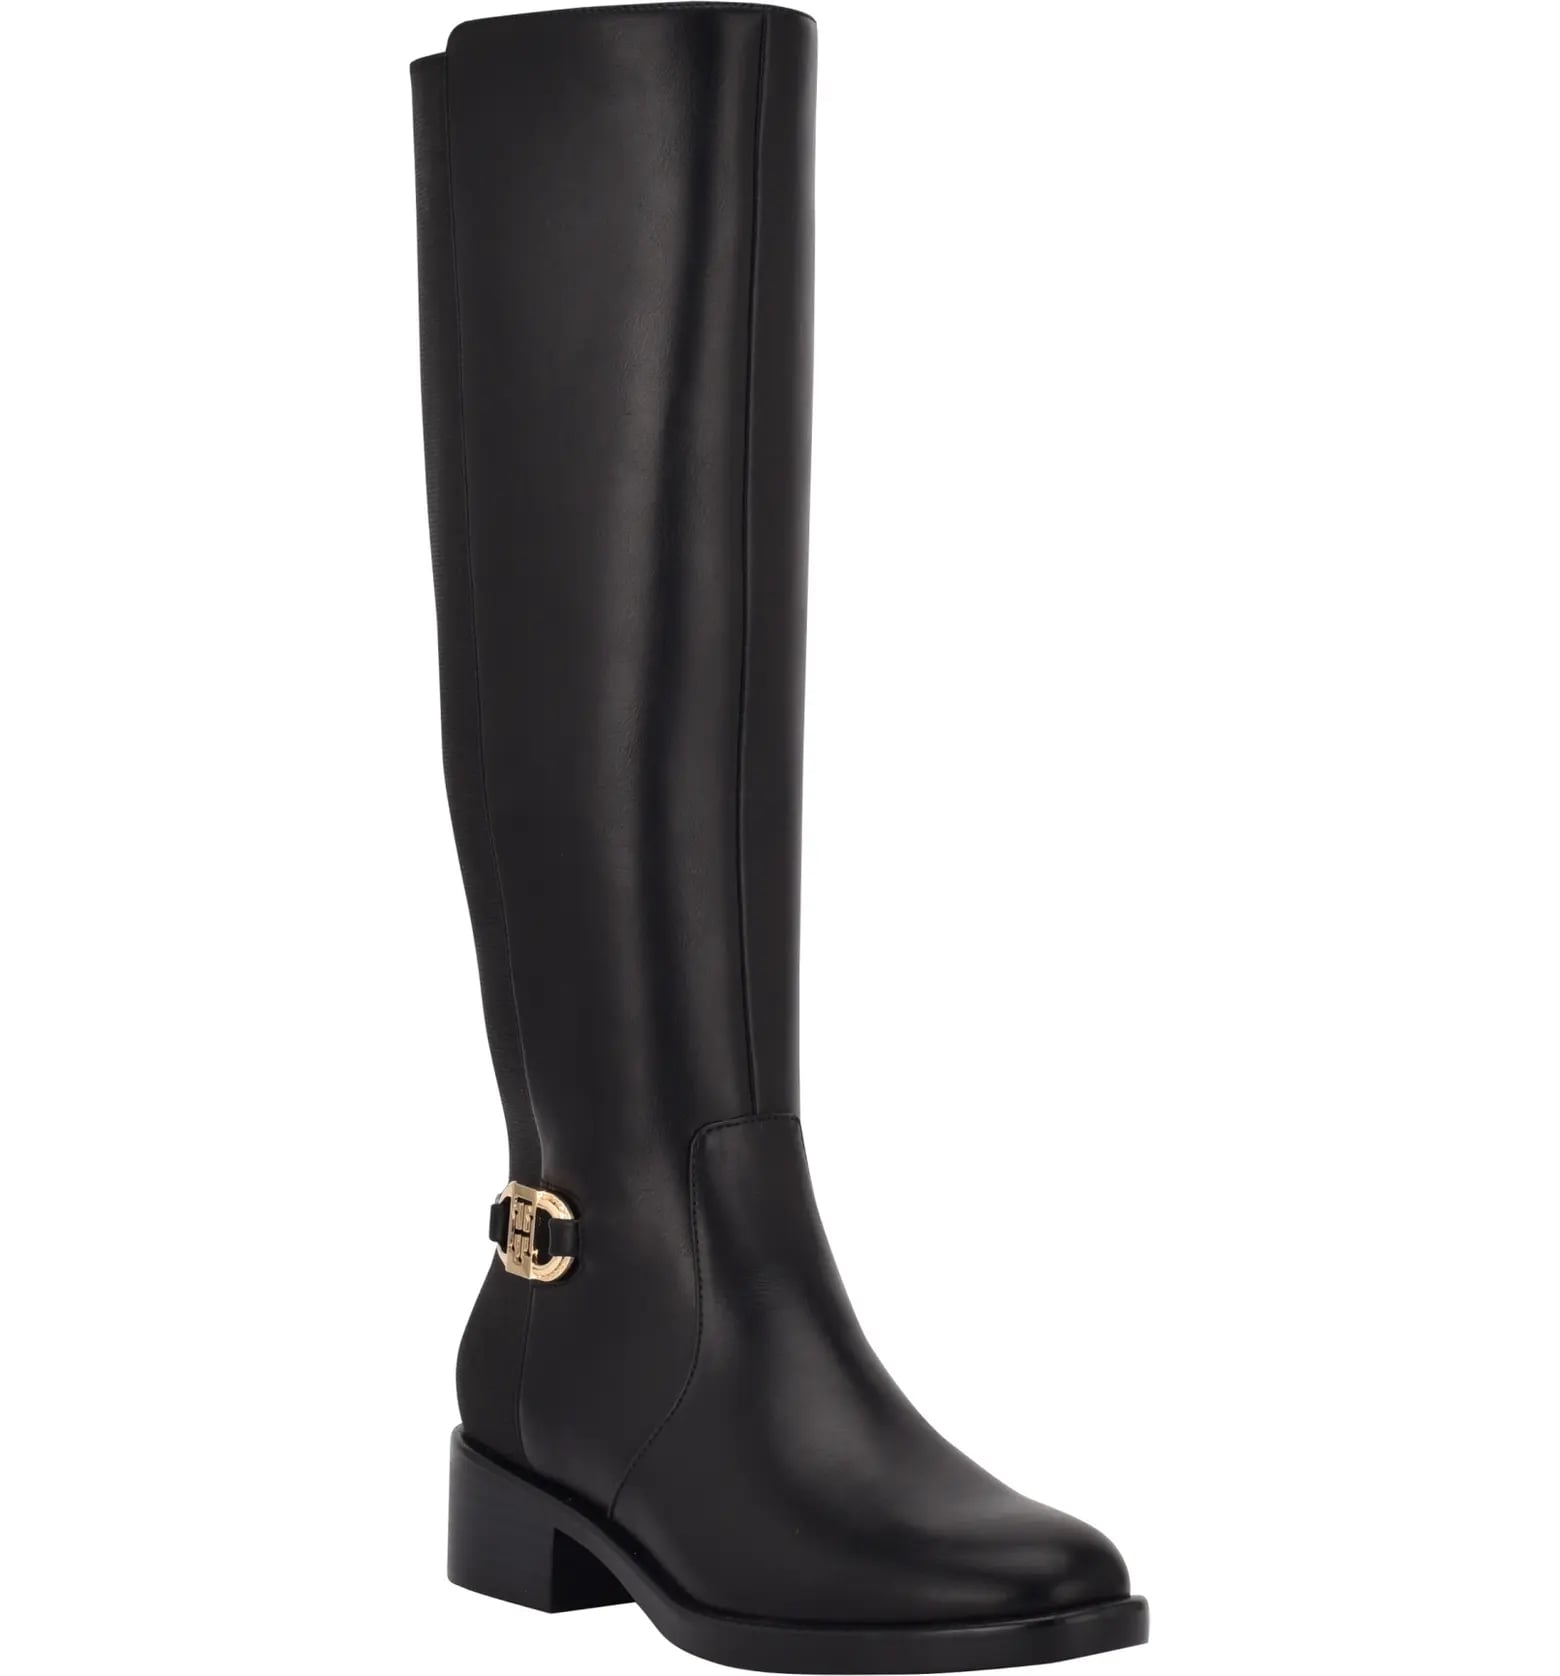 The Best Riding Boots For Women 2022